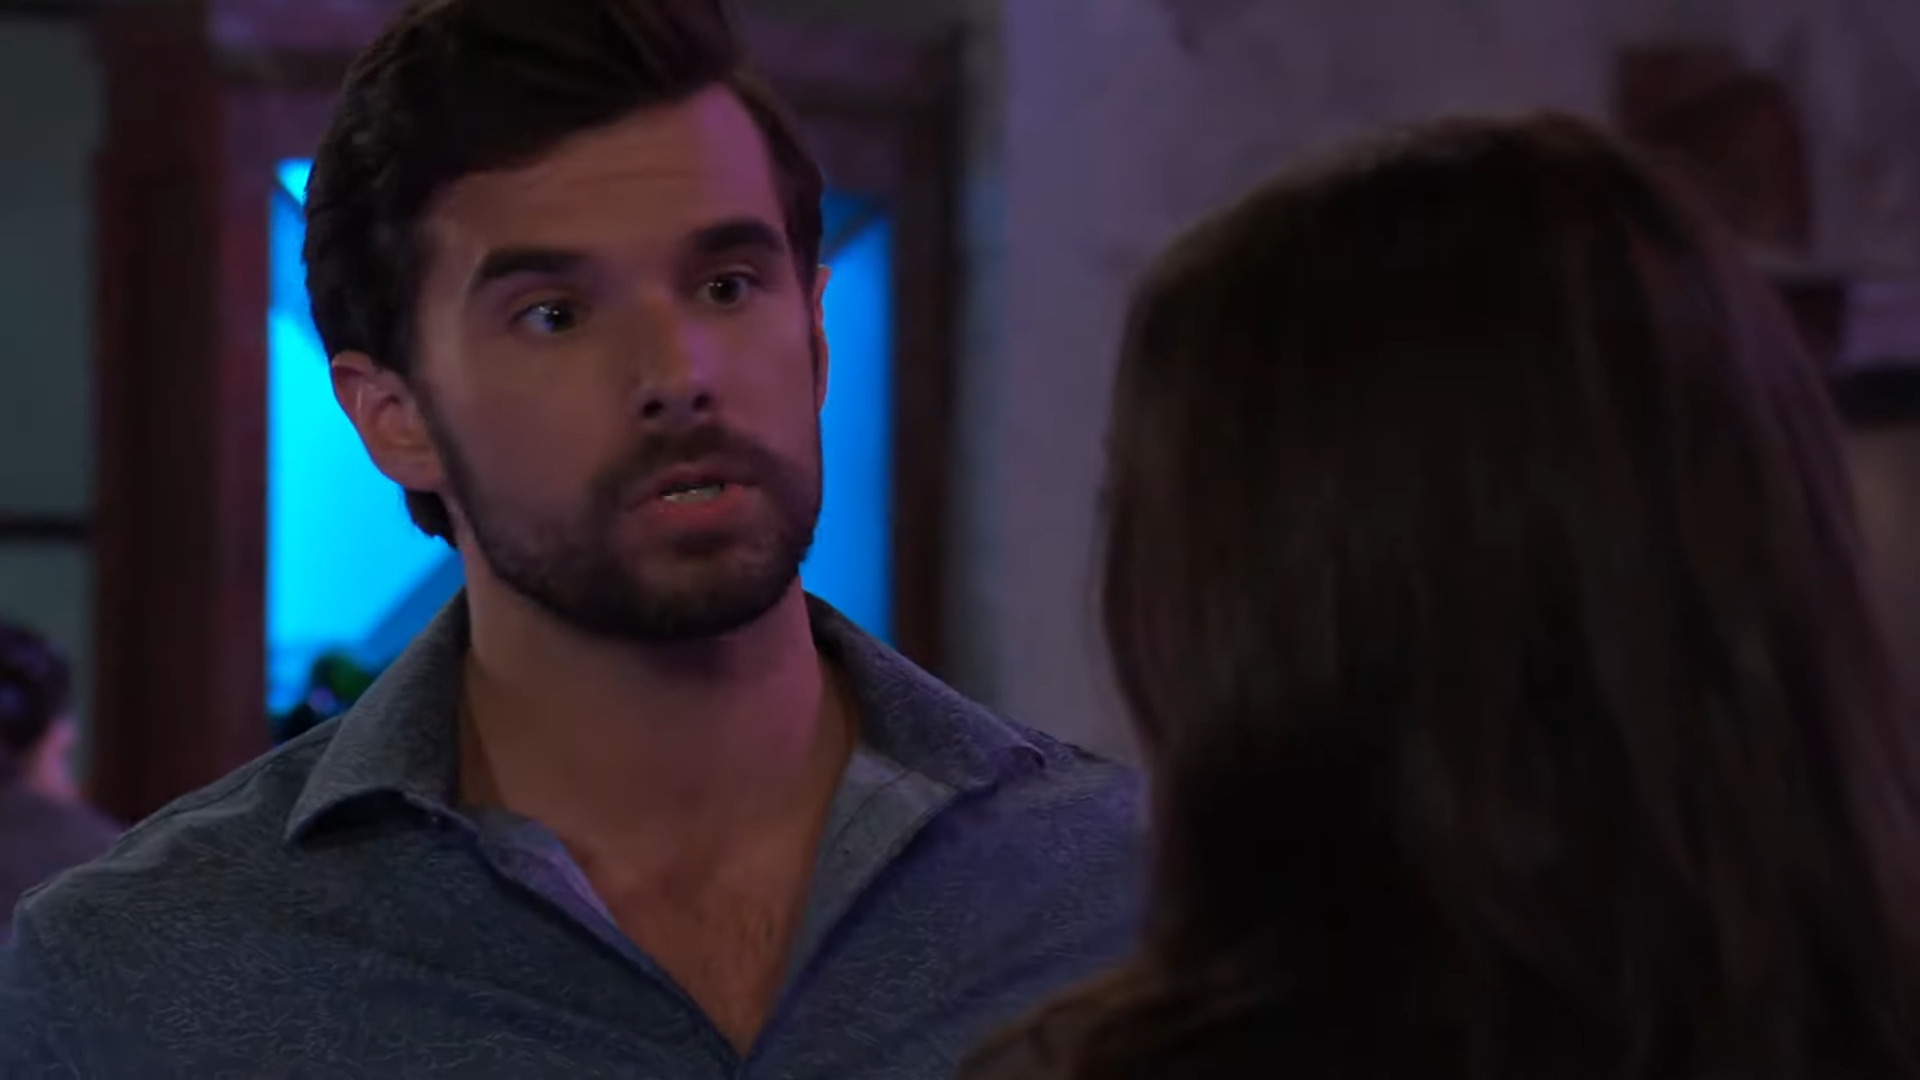 chase tells brook lynn is worse position GH